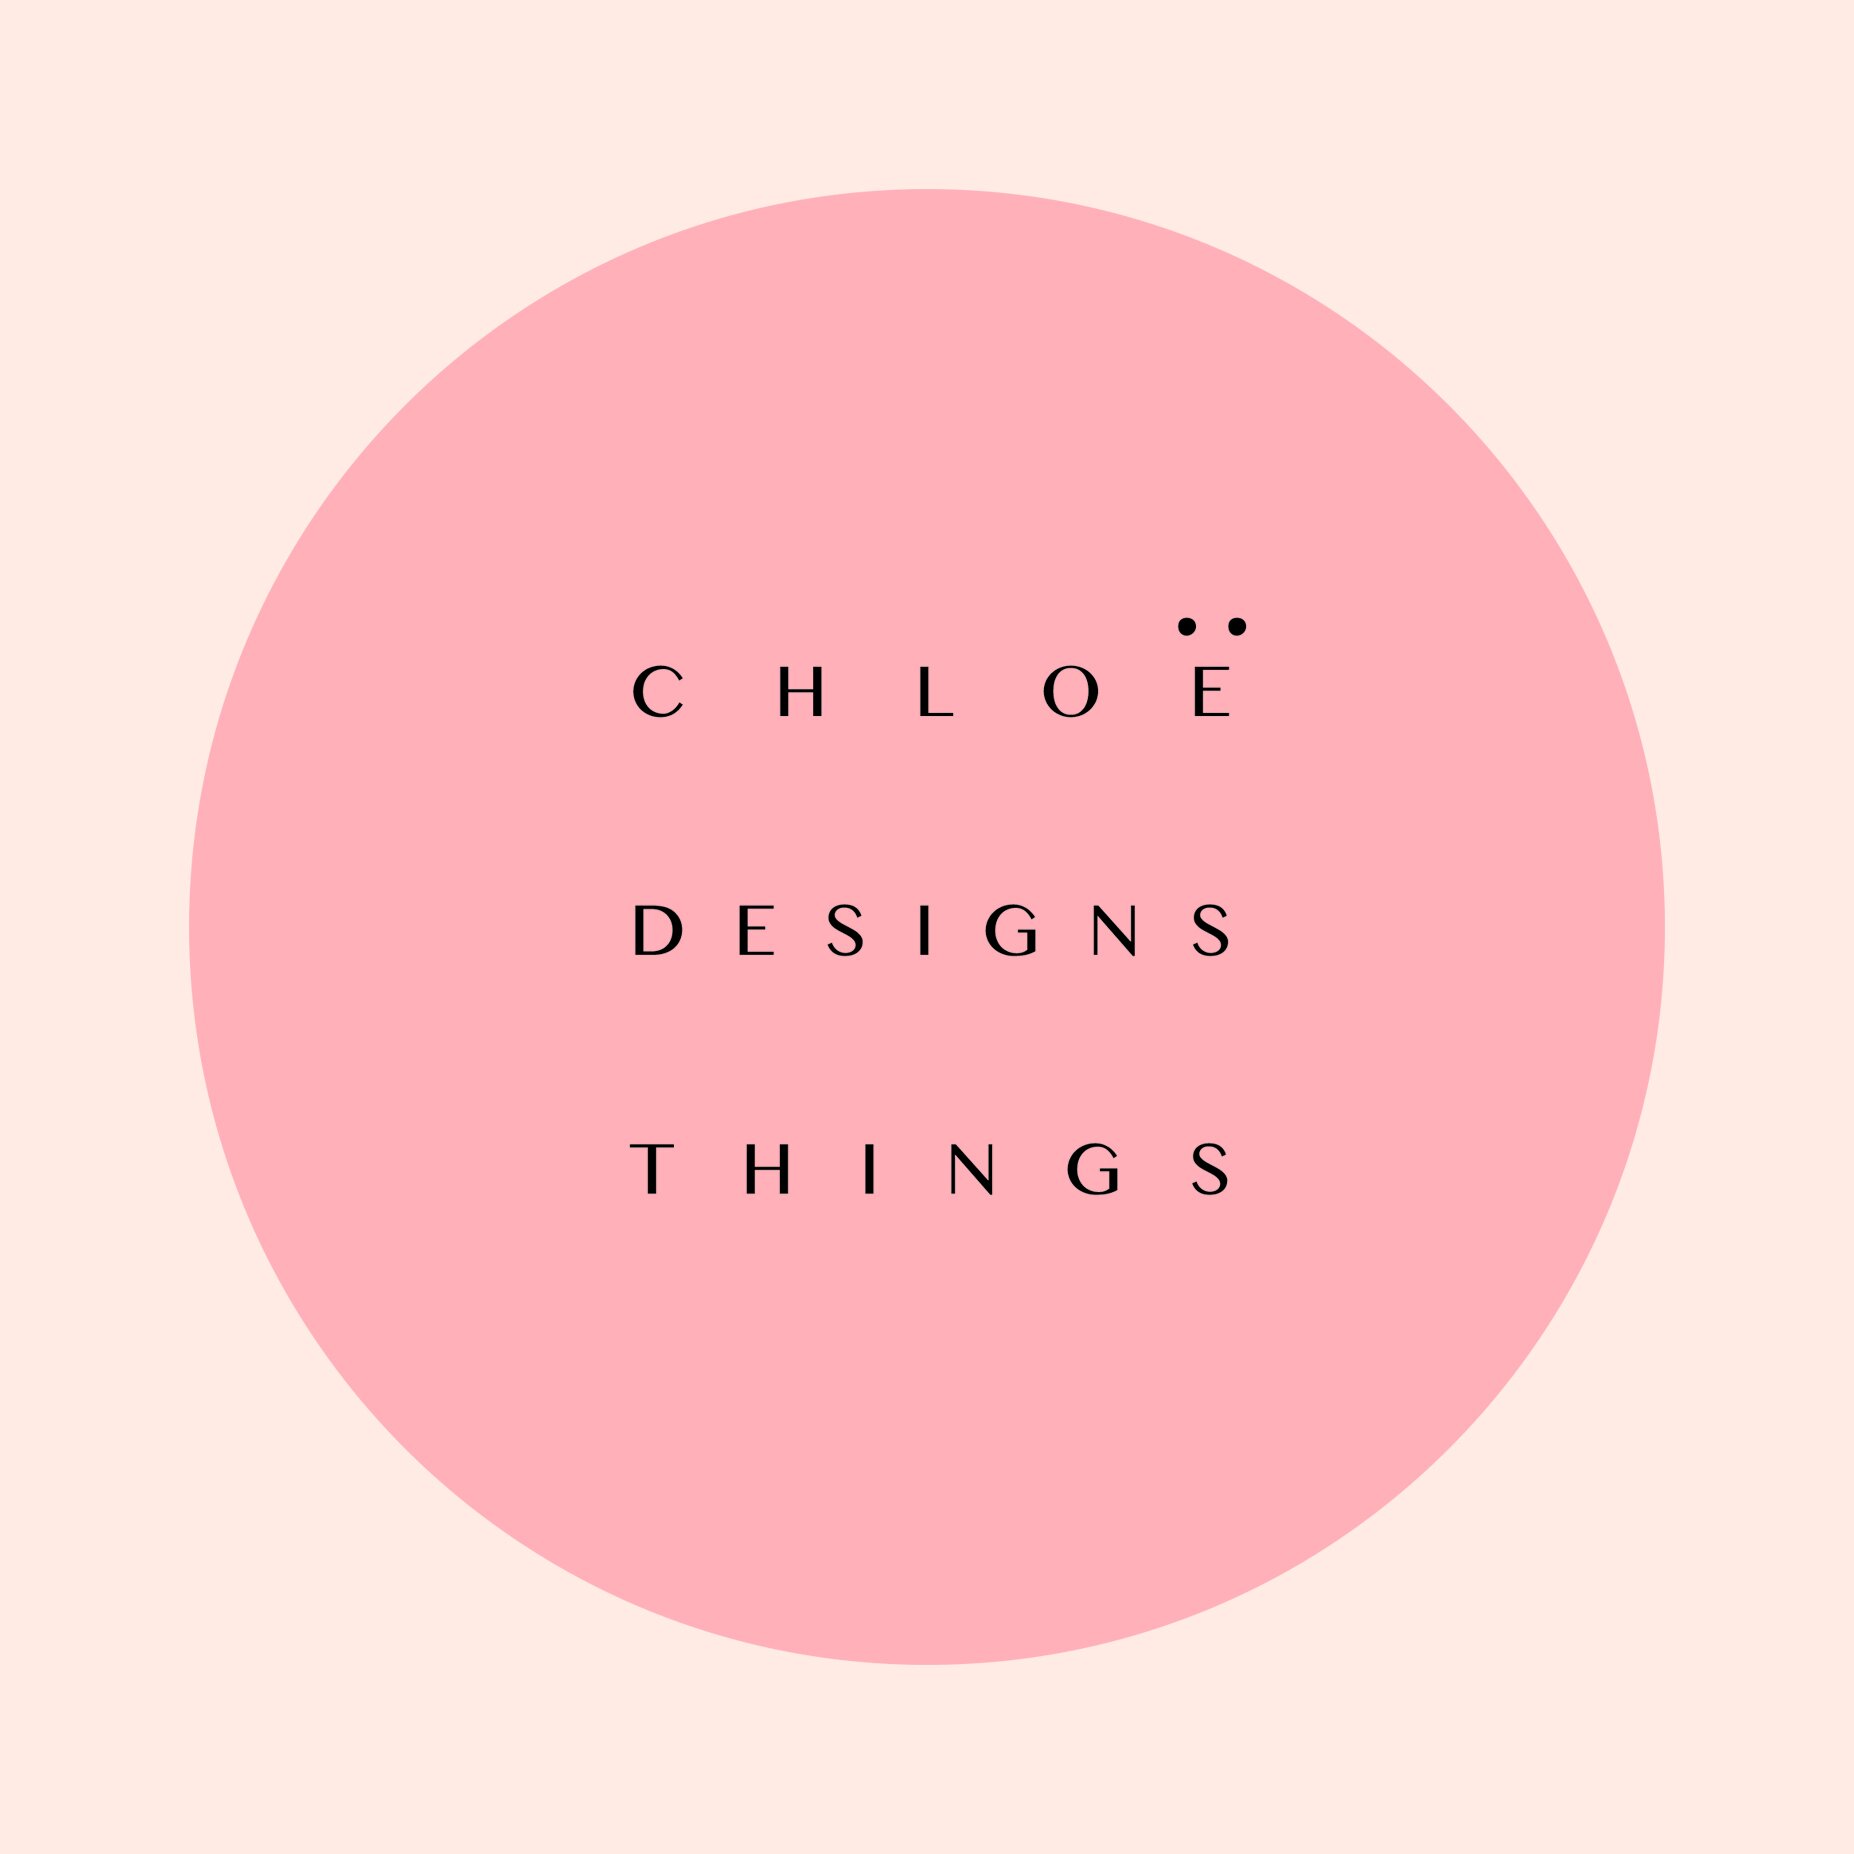 About The Brand — CHLOË DESIGNS THINGS